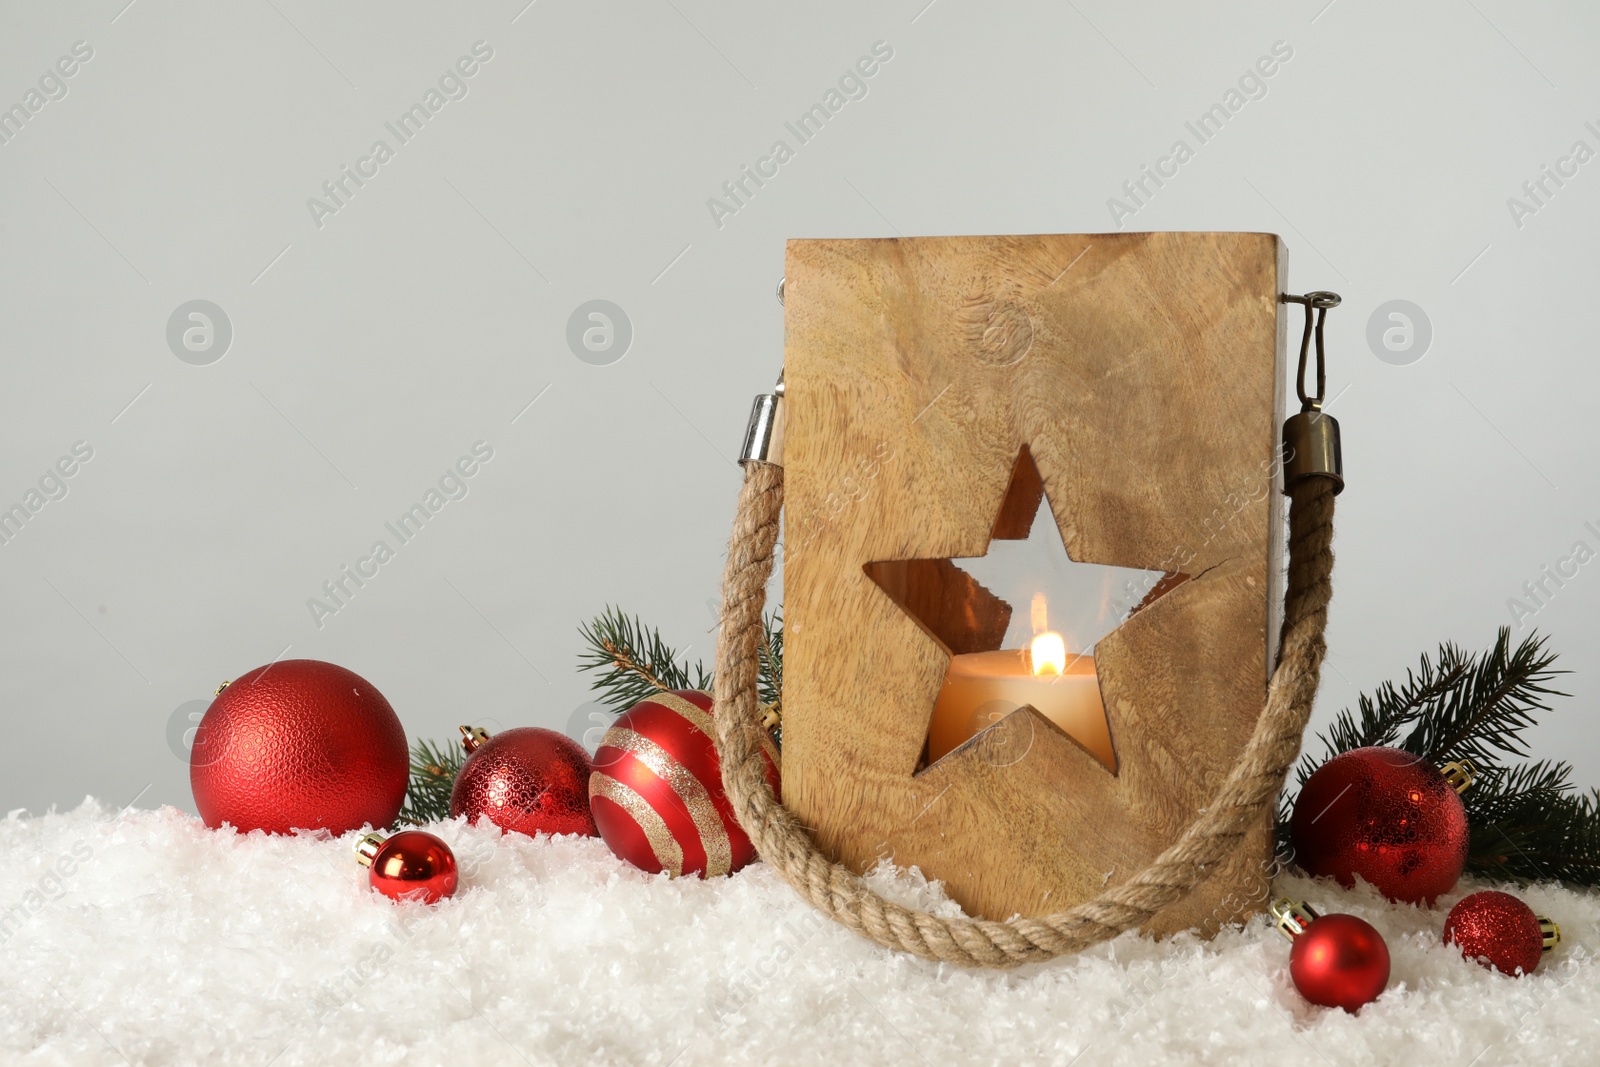 Photo of Composition with wooden Christmas lantern on snow against light grey background, space for text